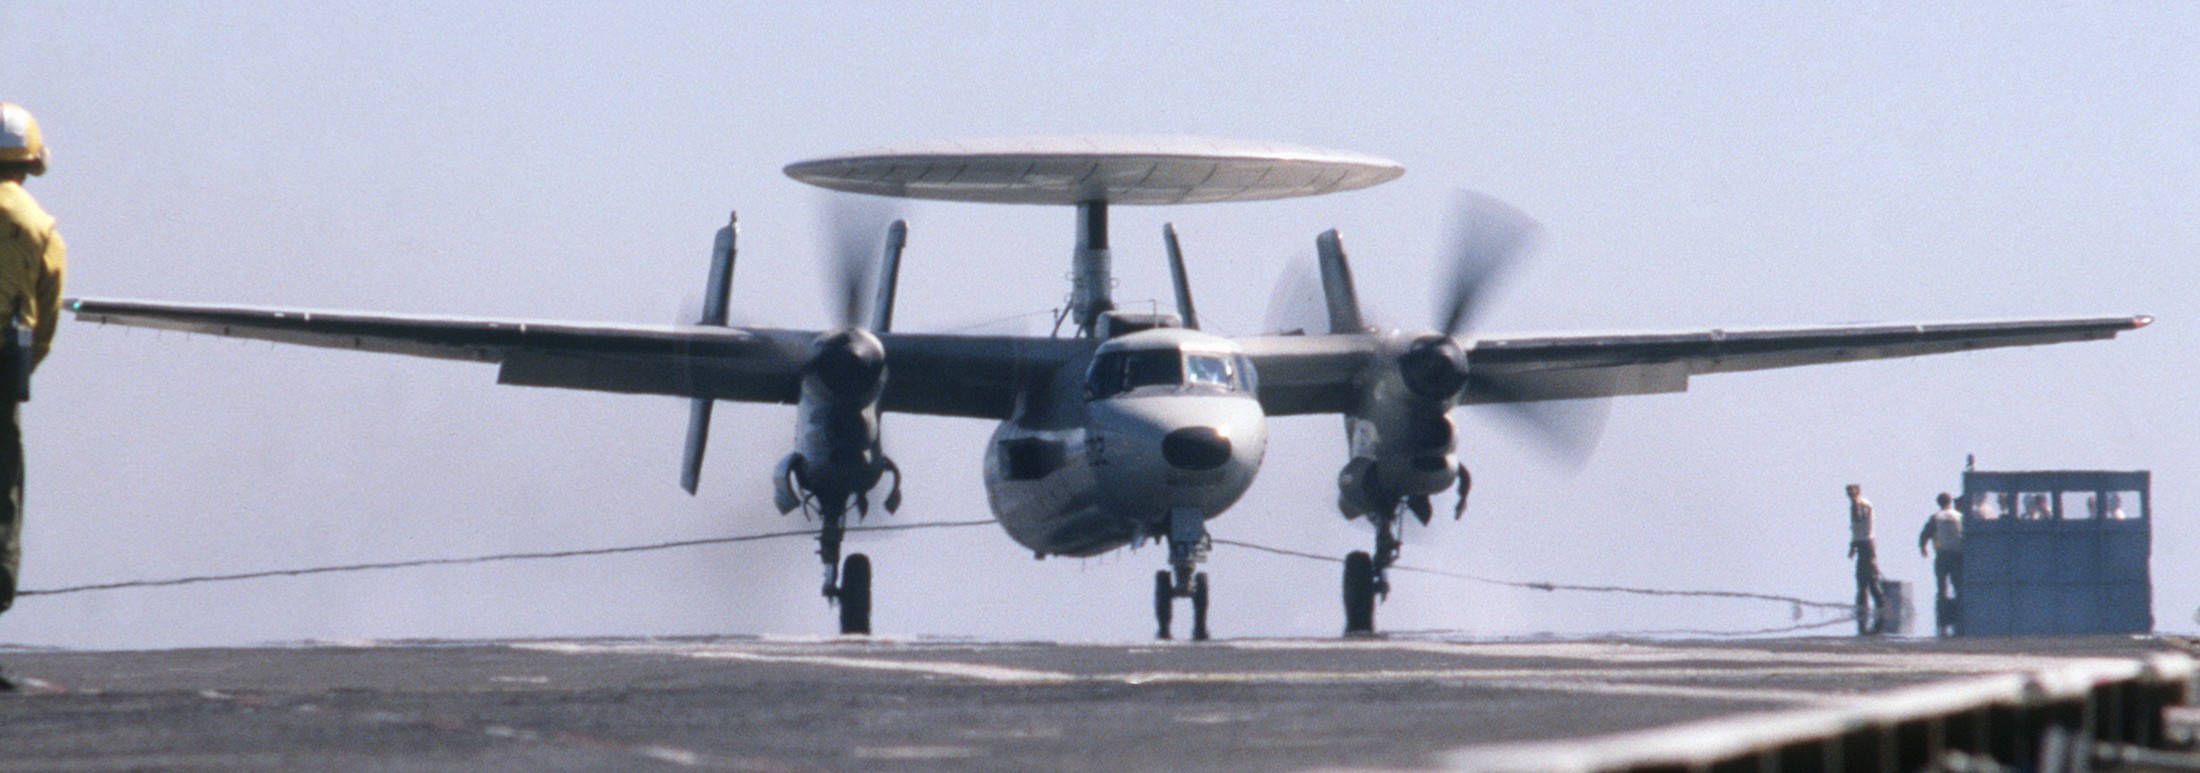 vaw-88 cottonpickers carrier airborne early warning squadron us navy reserve cvwr-30 grumman e-2c hawkeye 02